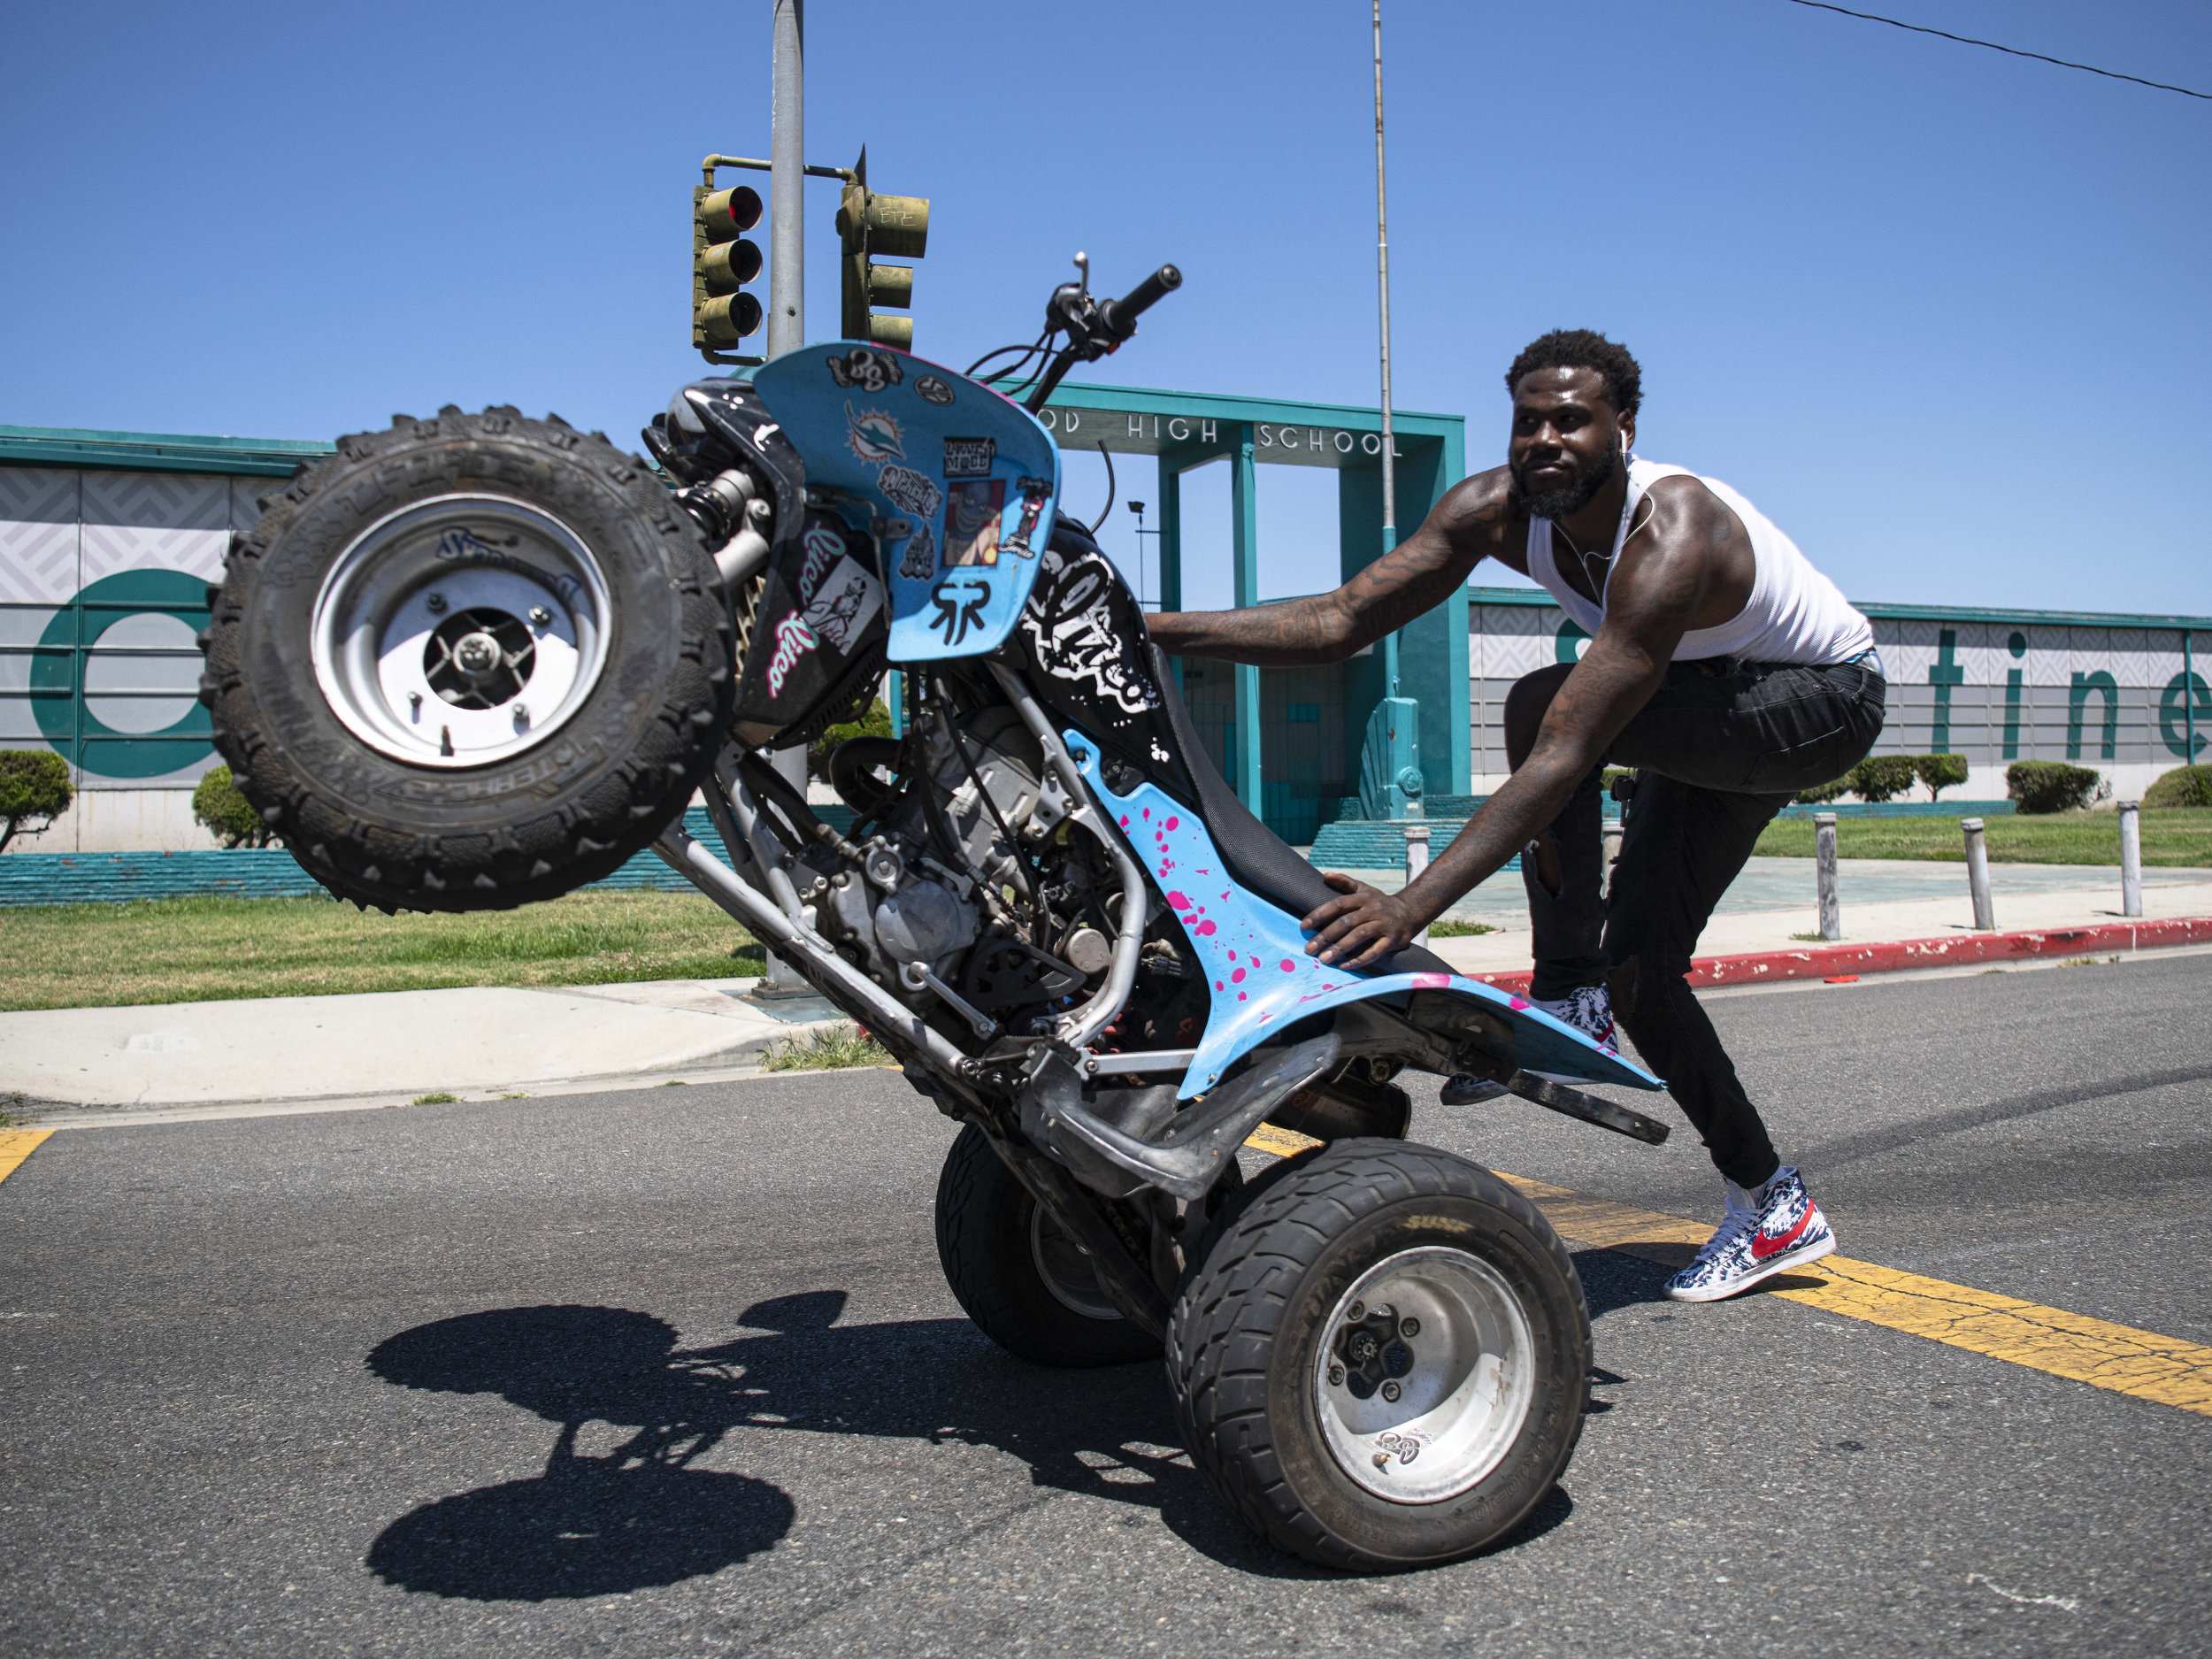  A Juneteenth participant performs stunts on his 4 Wheeler in front police and the curious public (Jon Putman | The Corsair) 